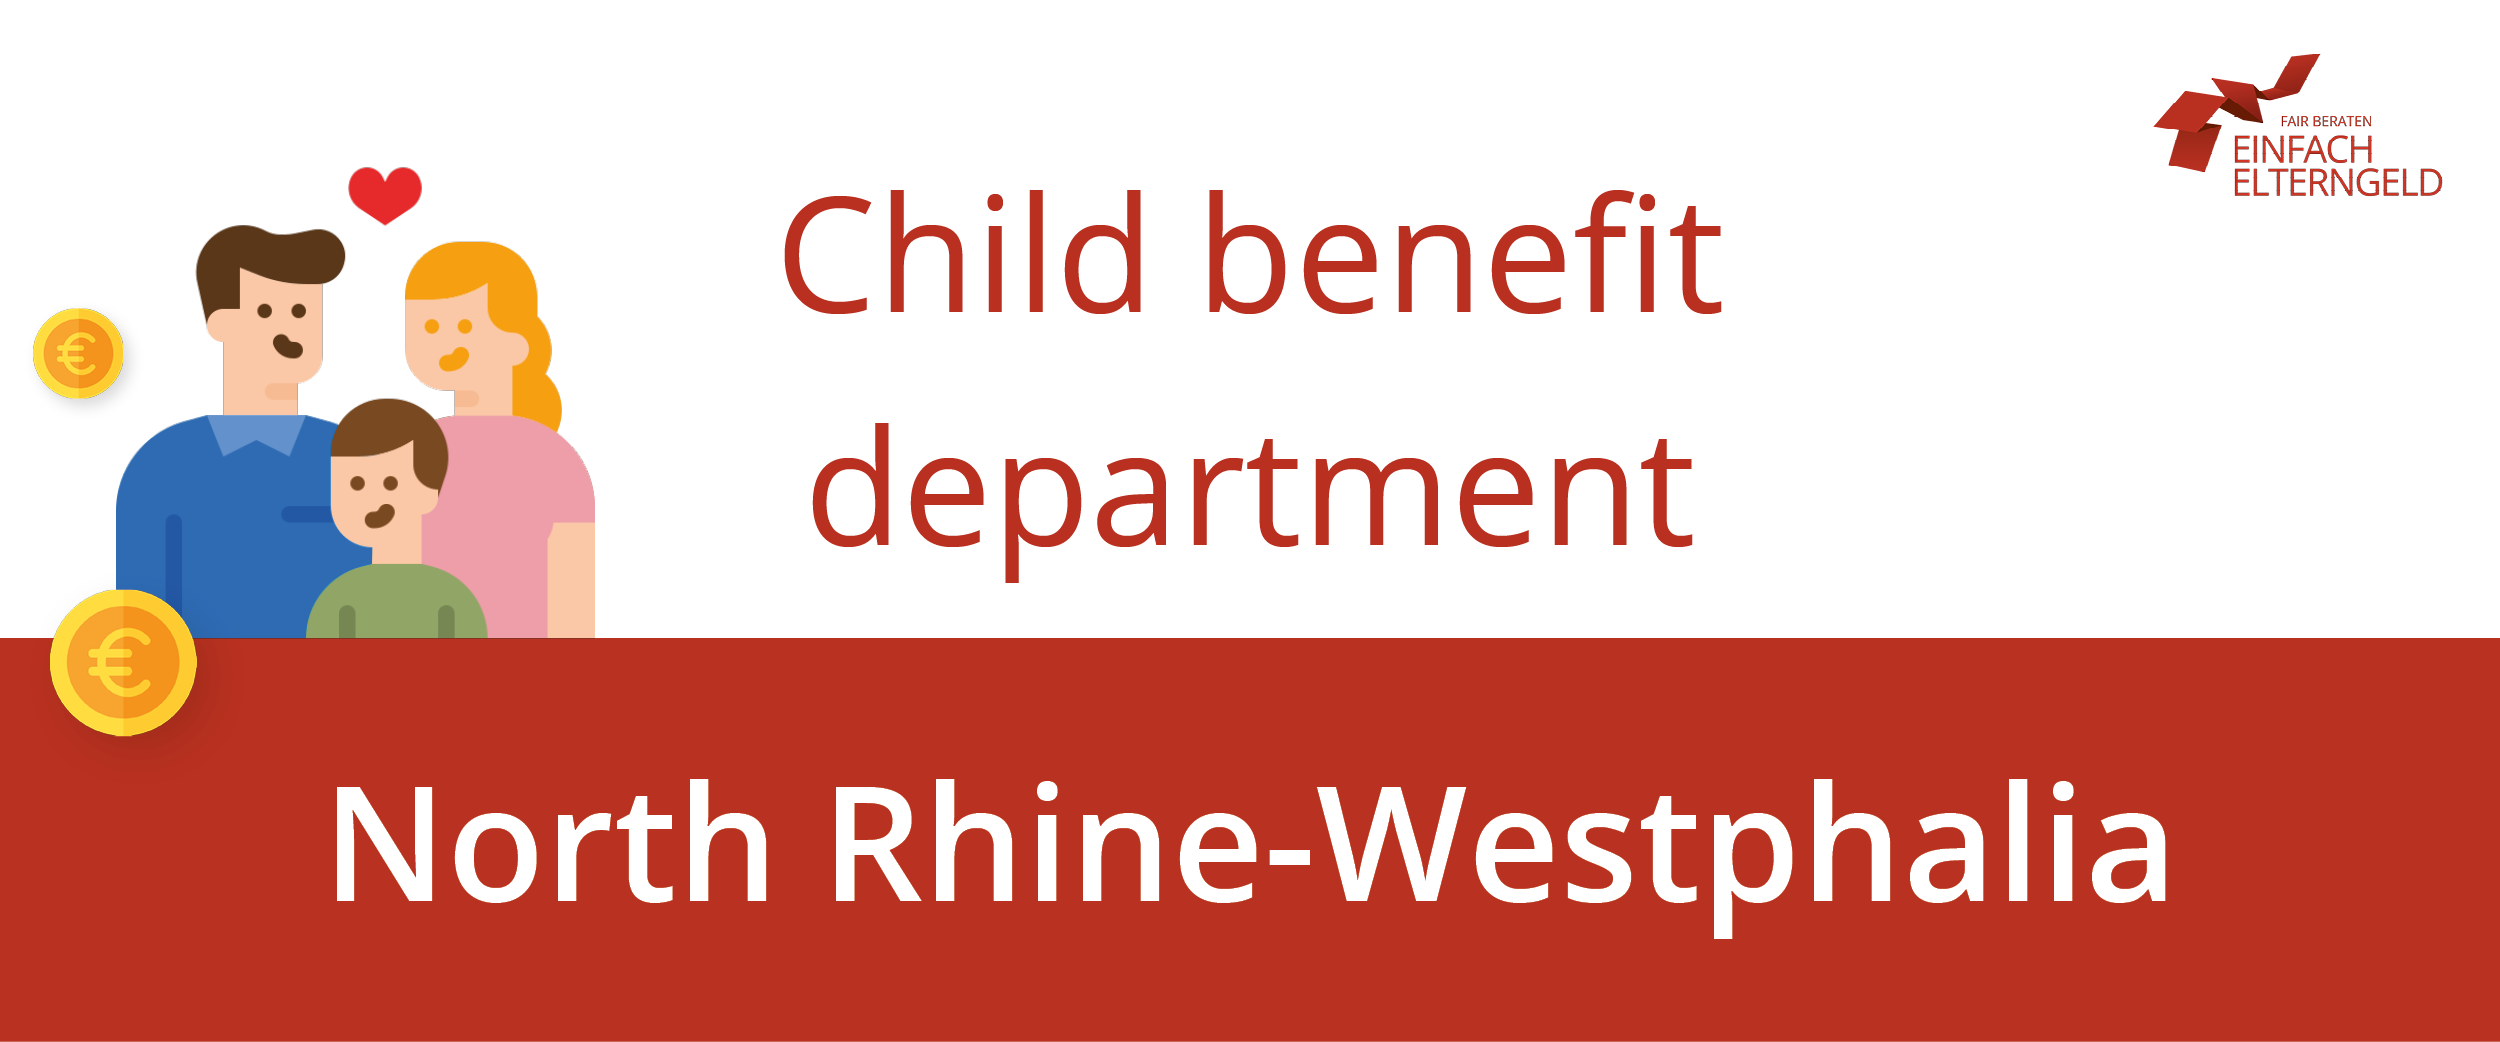 This is the child benefit department of North Rhine-Westphalia.